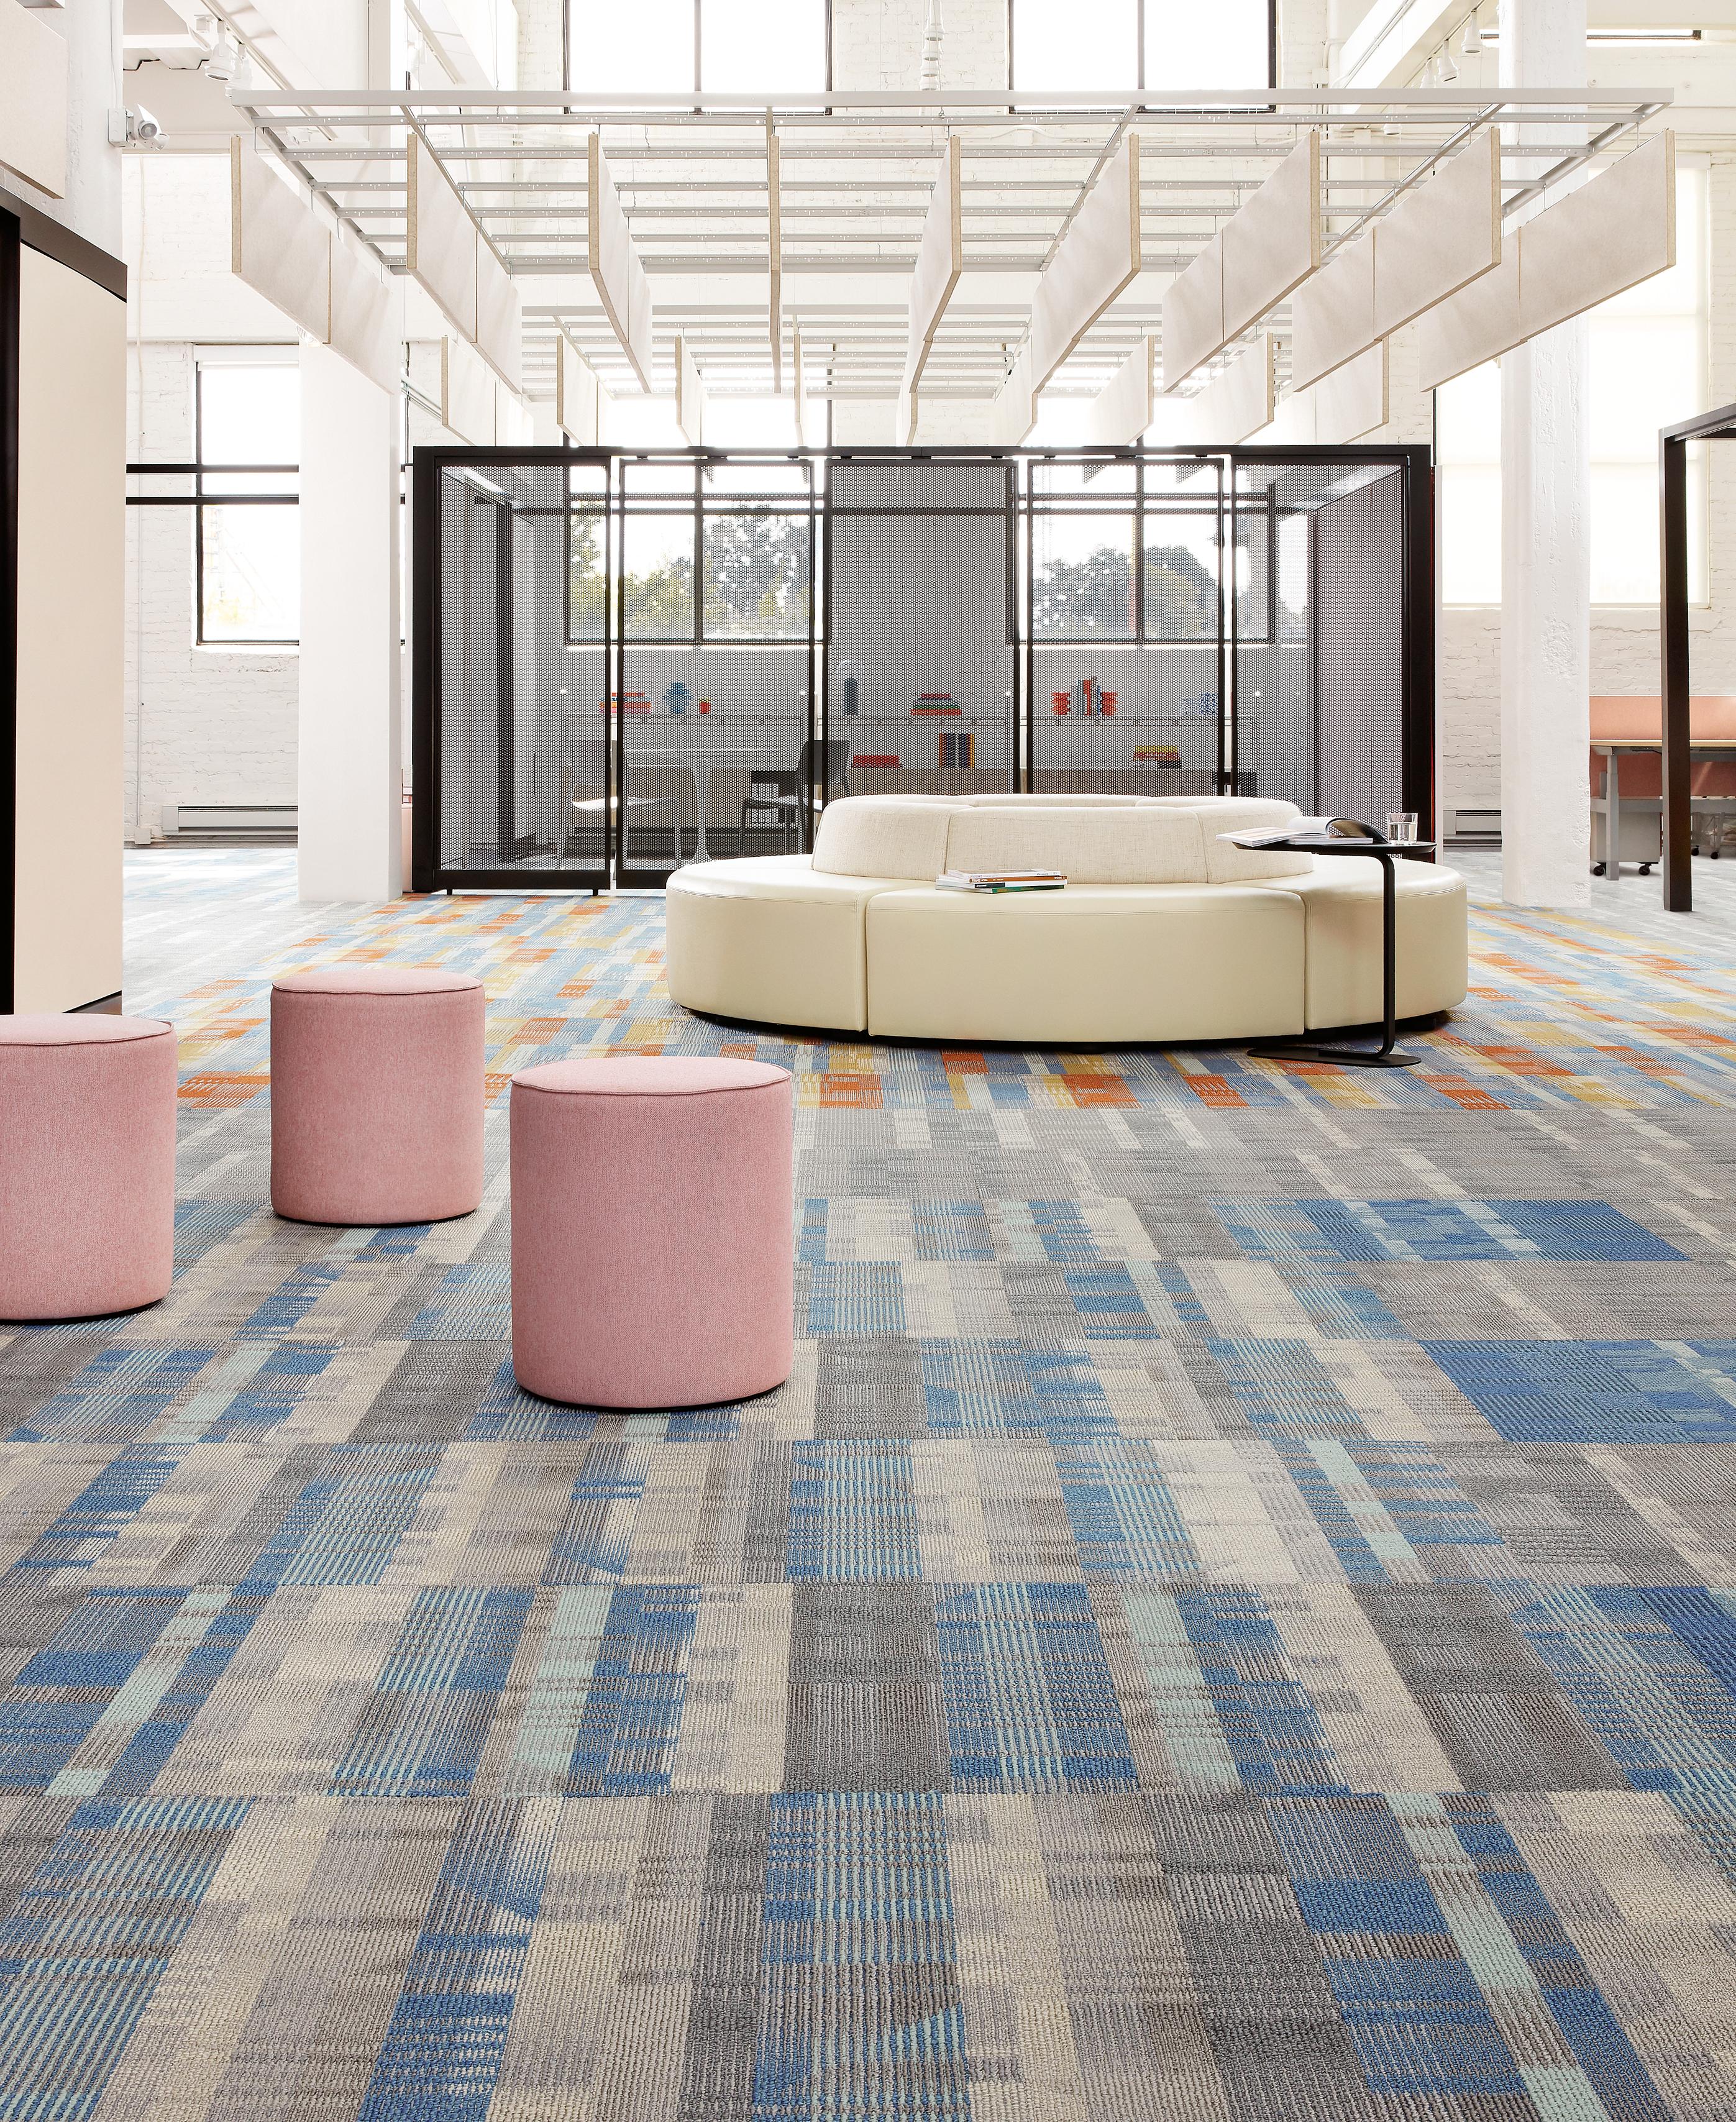 The Campus carpet tile collection was inspired by the Bauhaus aesthetic